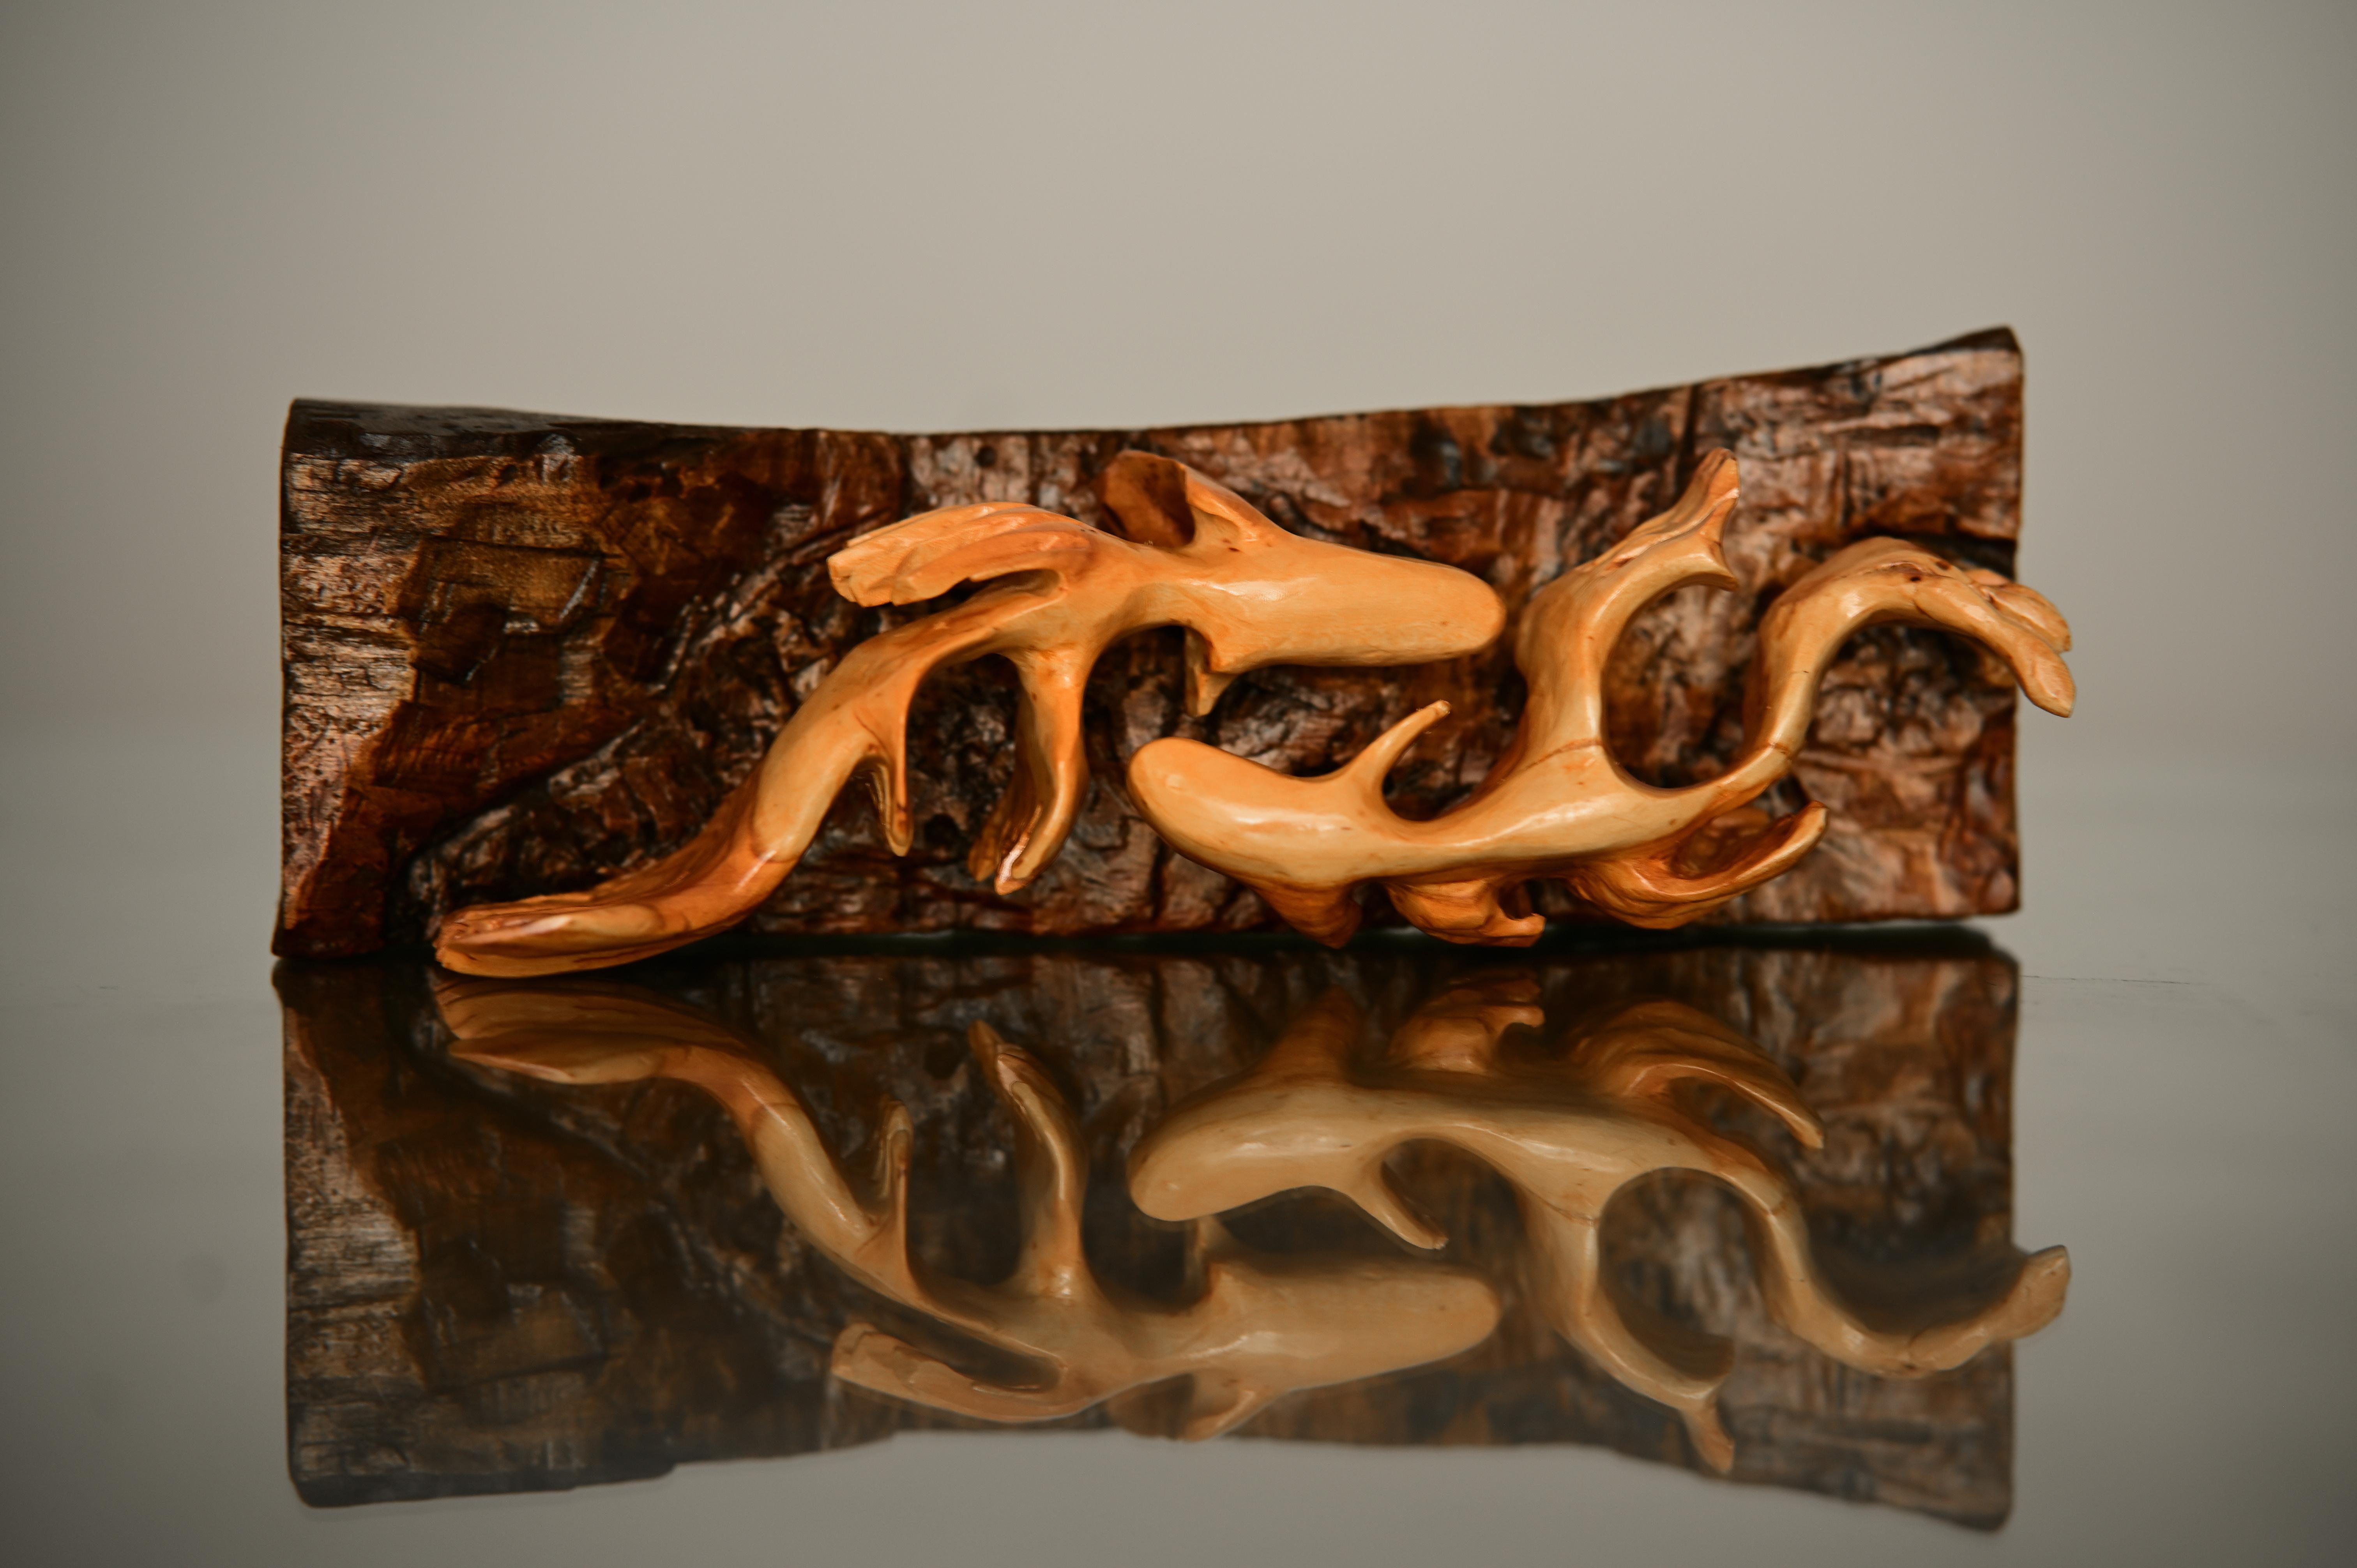 beta fish synchronized
3.5 x 4.5 x 10.0, 1.0 lbs 
Wood 
Hand signed by artist 

Artist's Commentary: 
